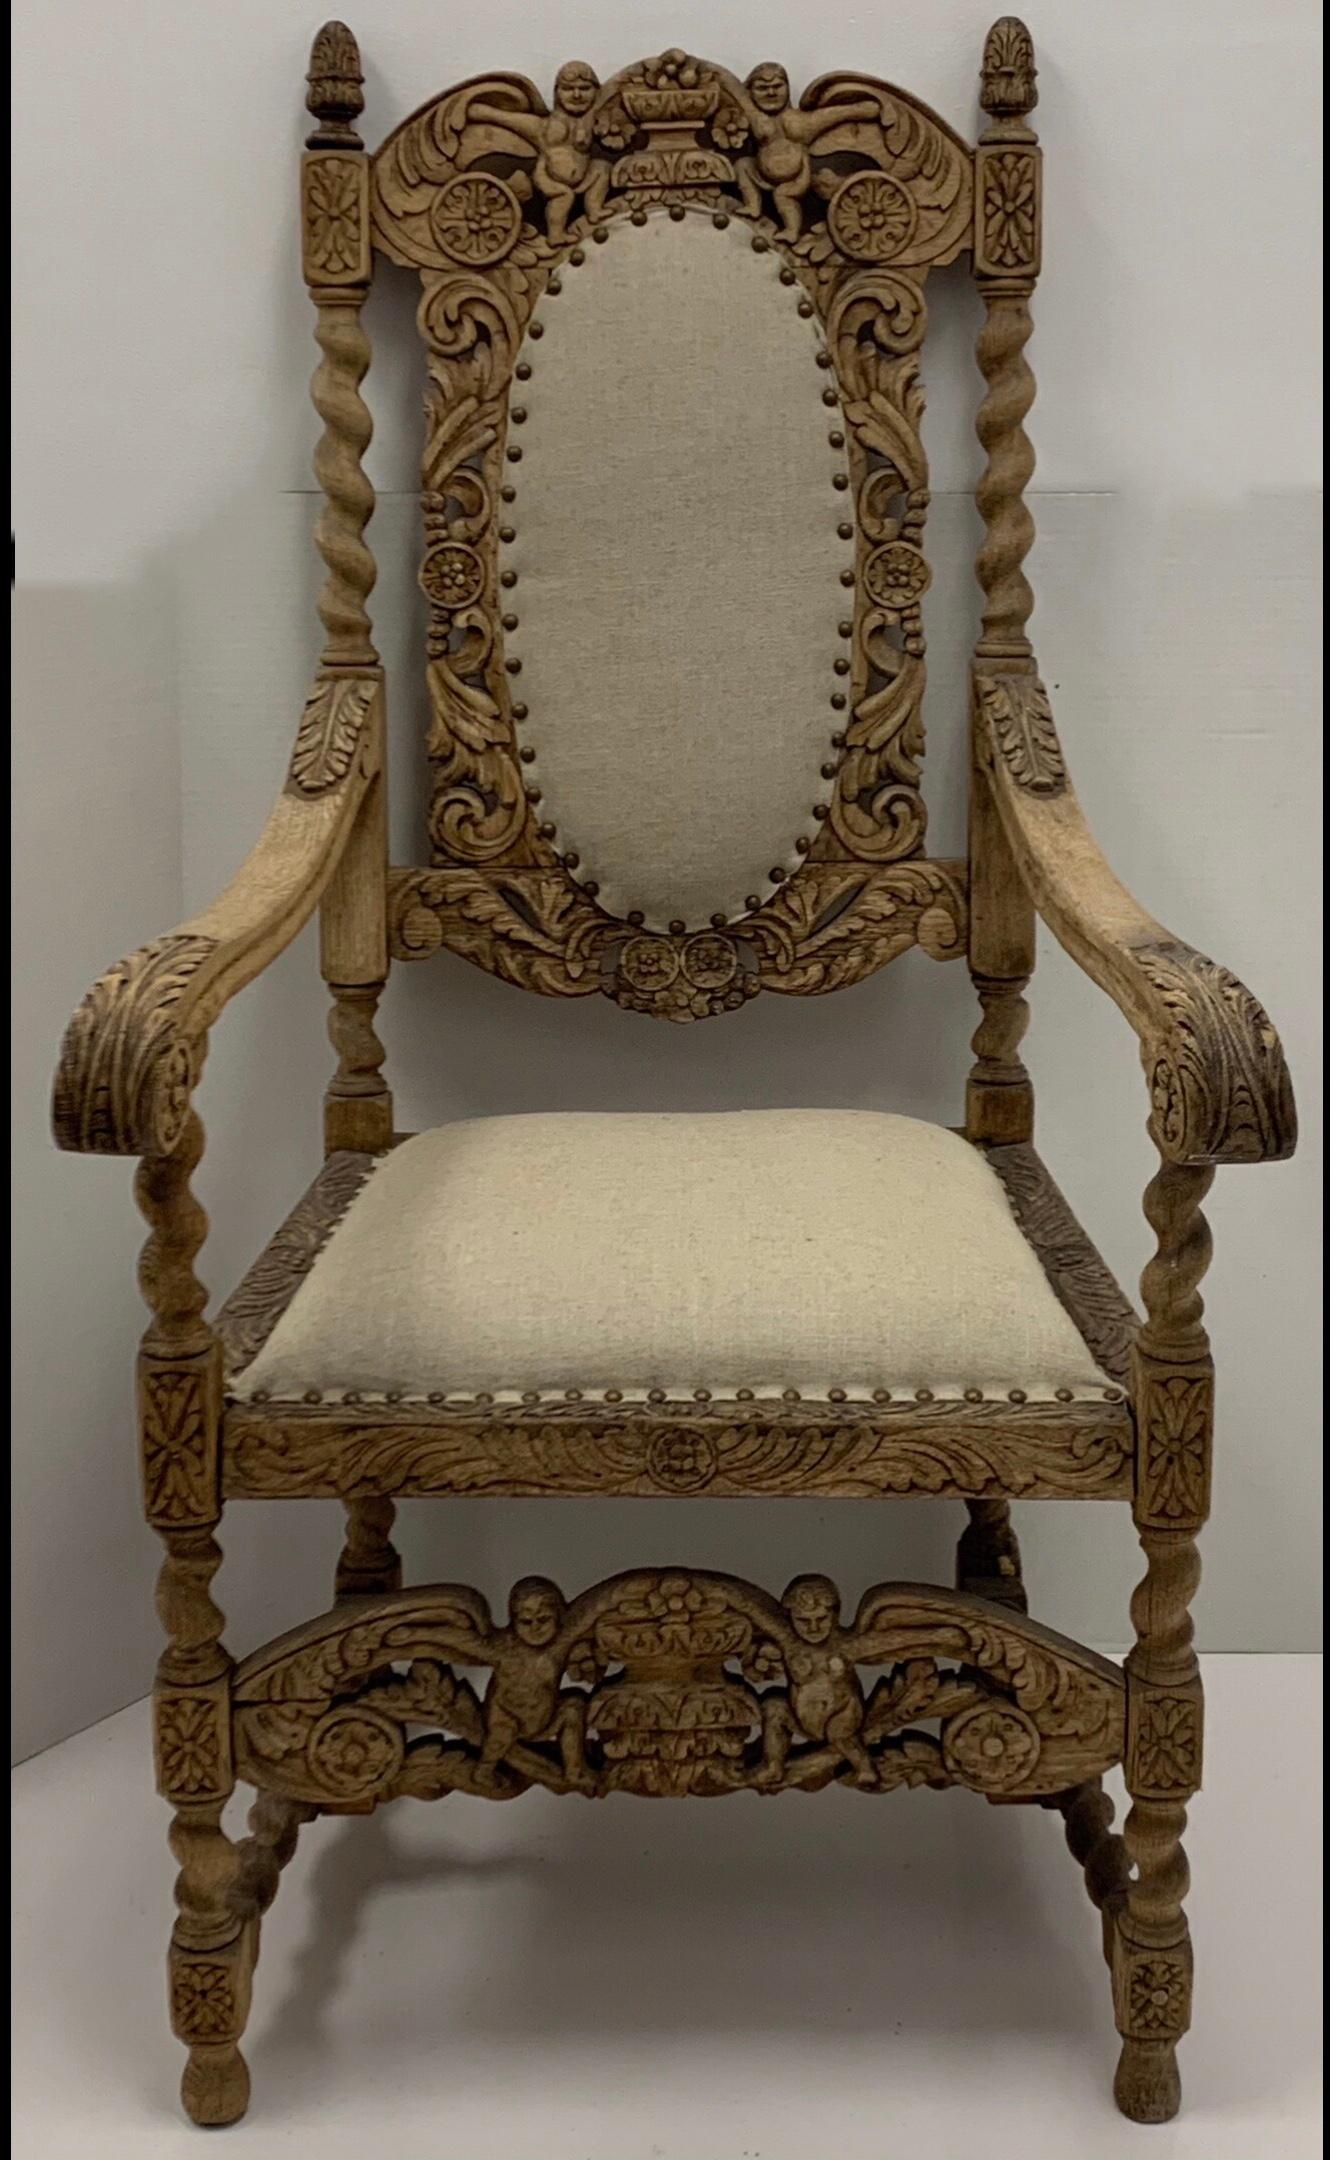 20th Century Early 20th C. English Jacobean Style Bleached Carved Oak Arm Chair in Linen